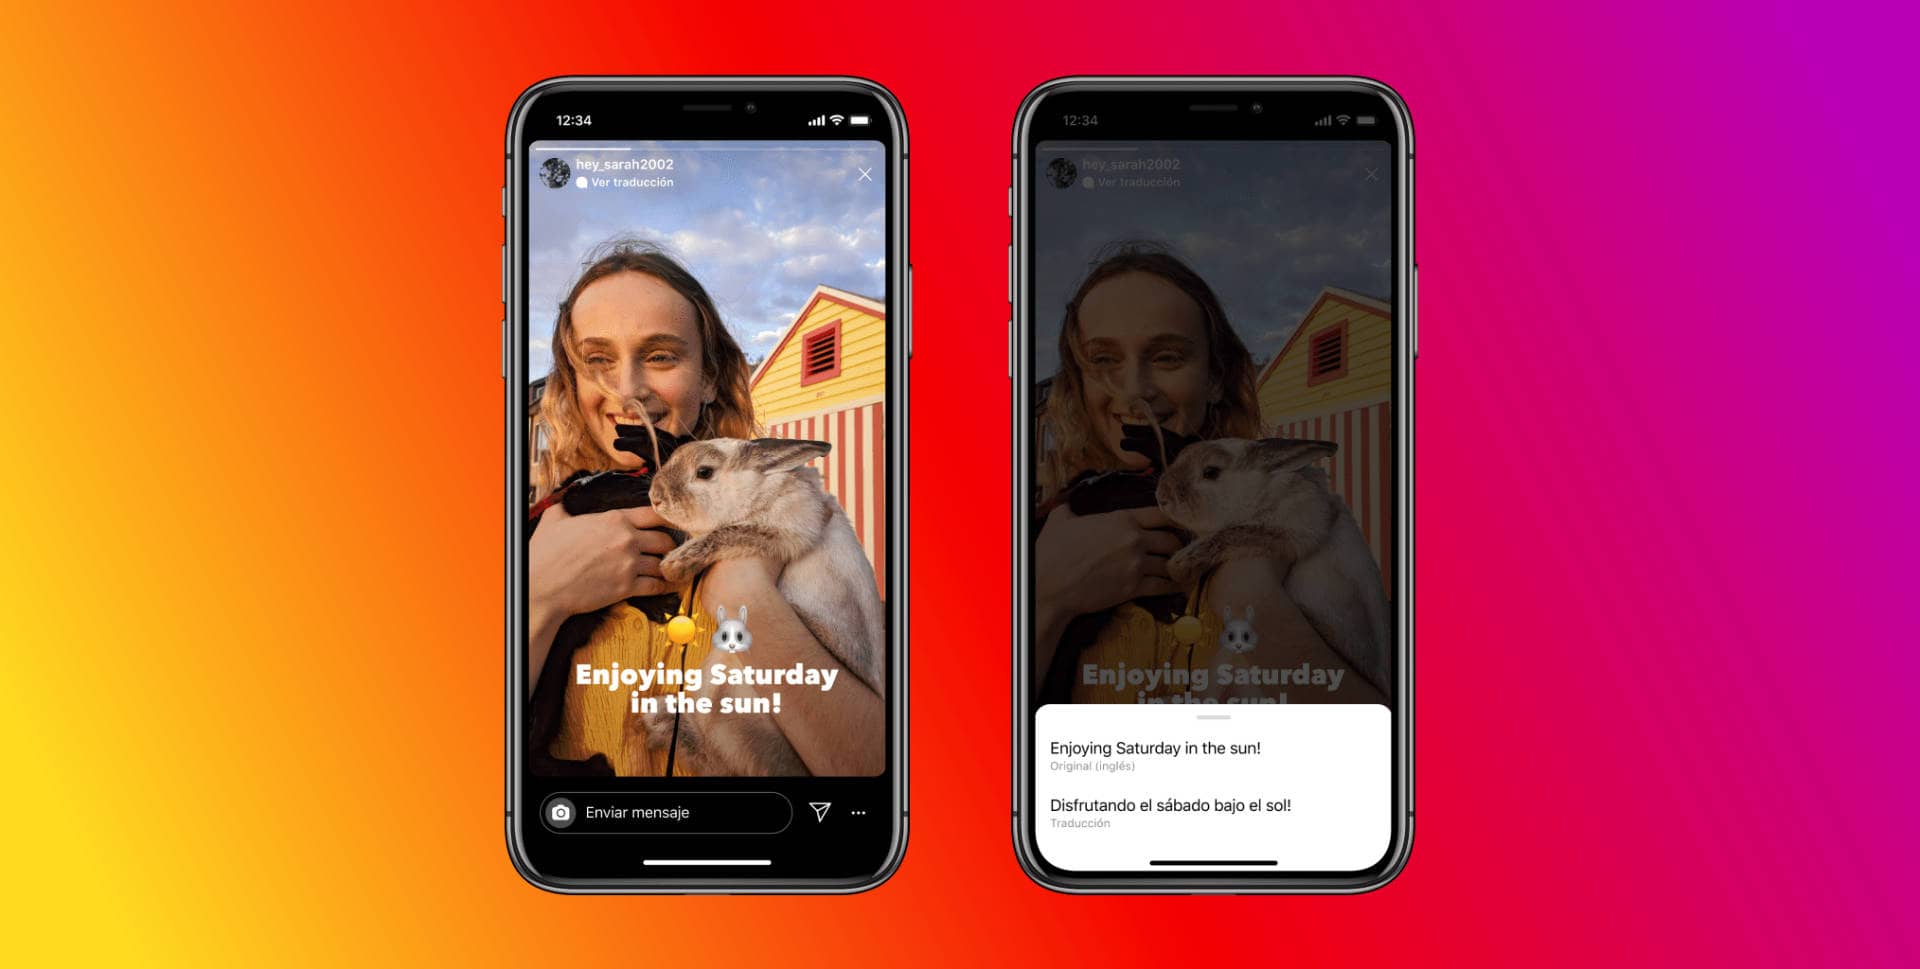 Instagram Stories now has built-in Text Translation